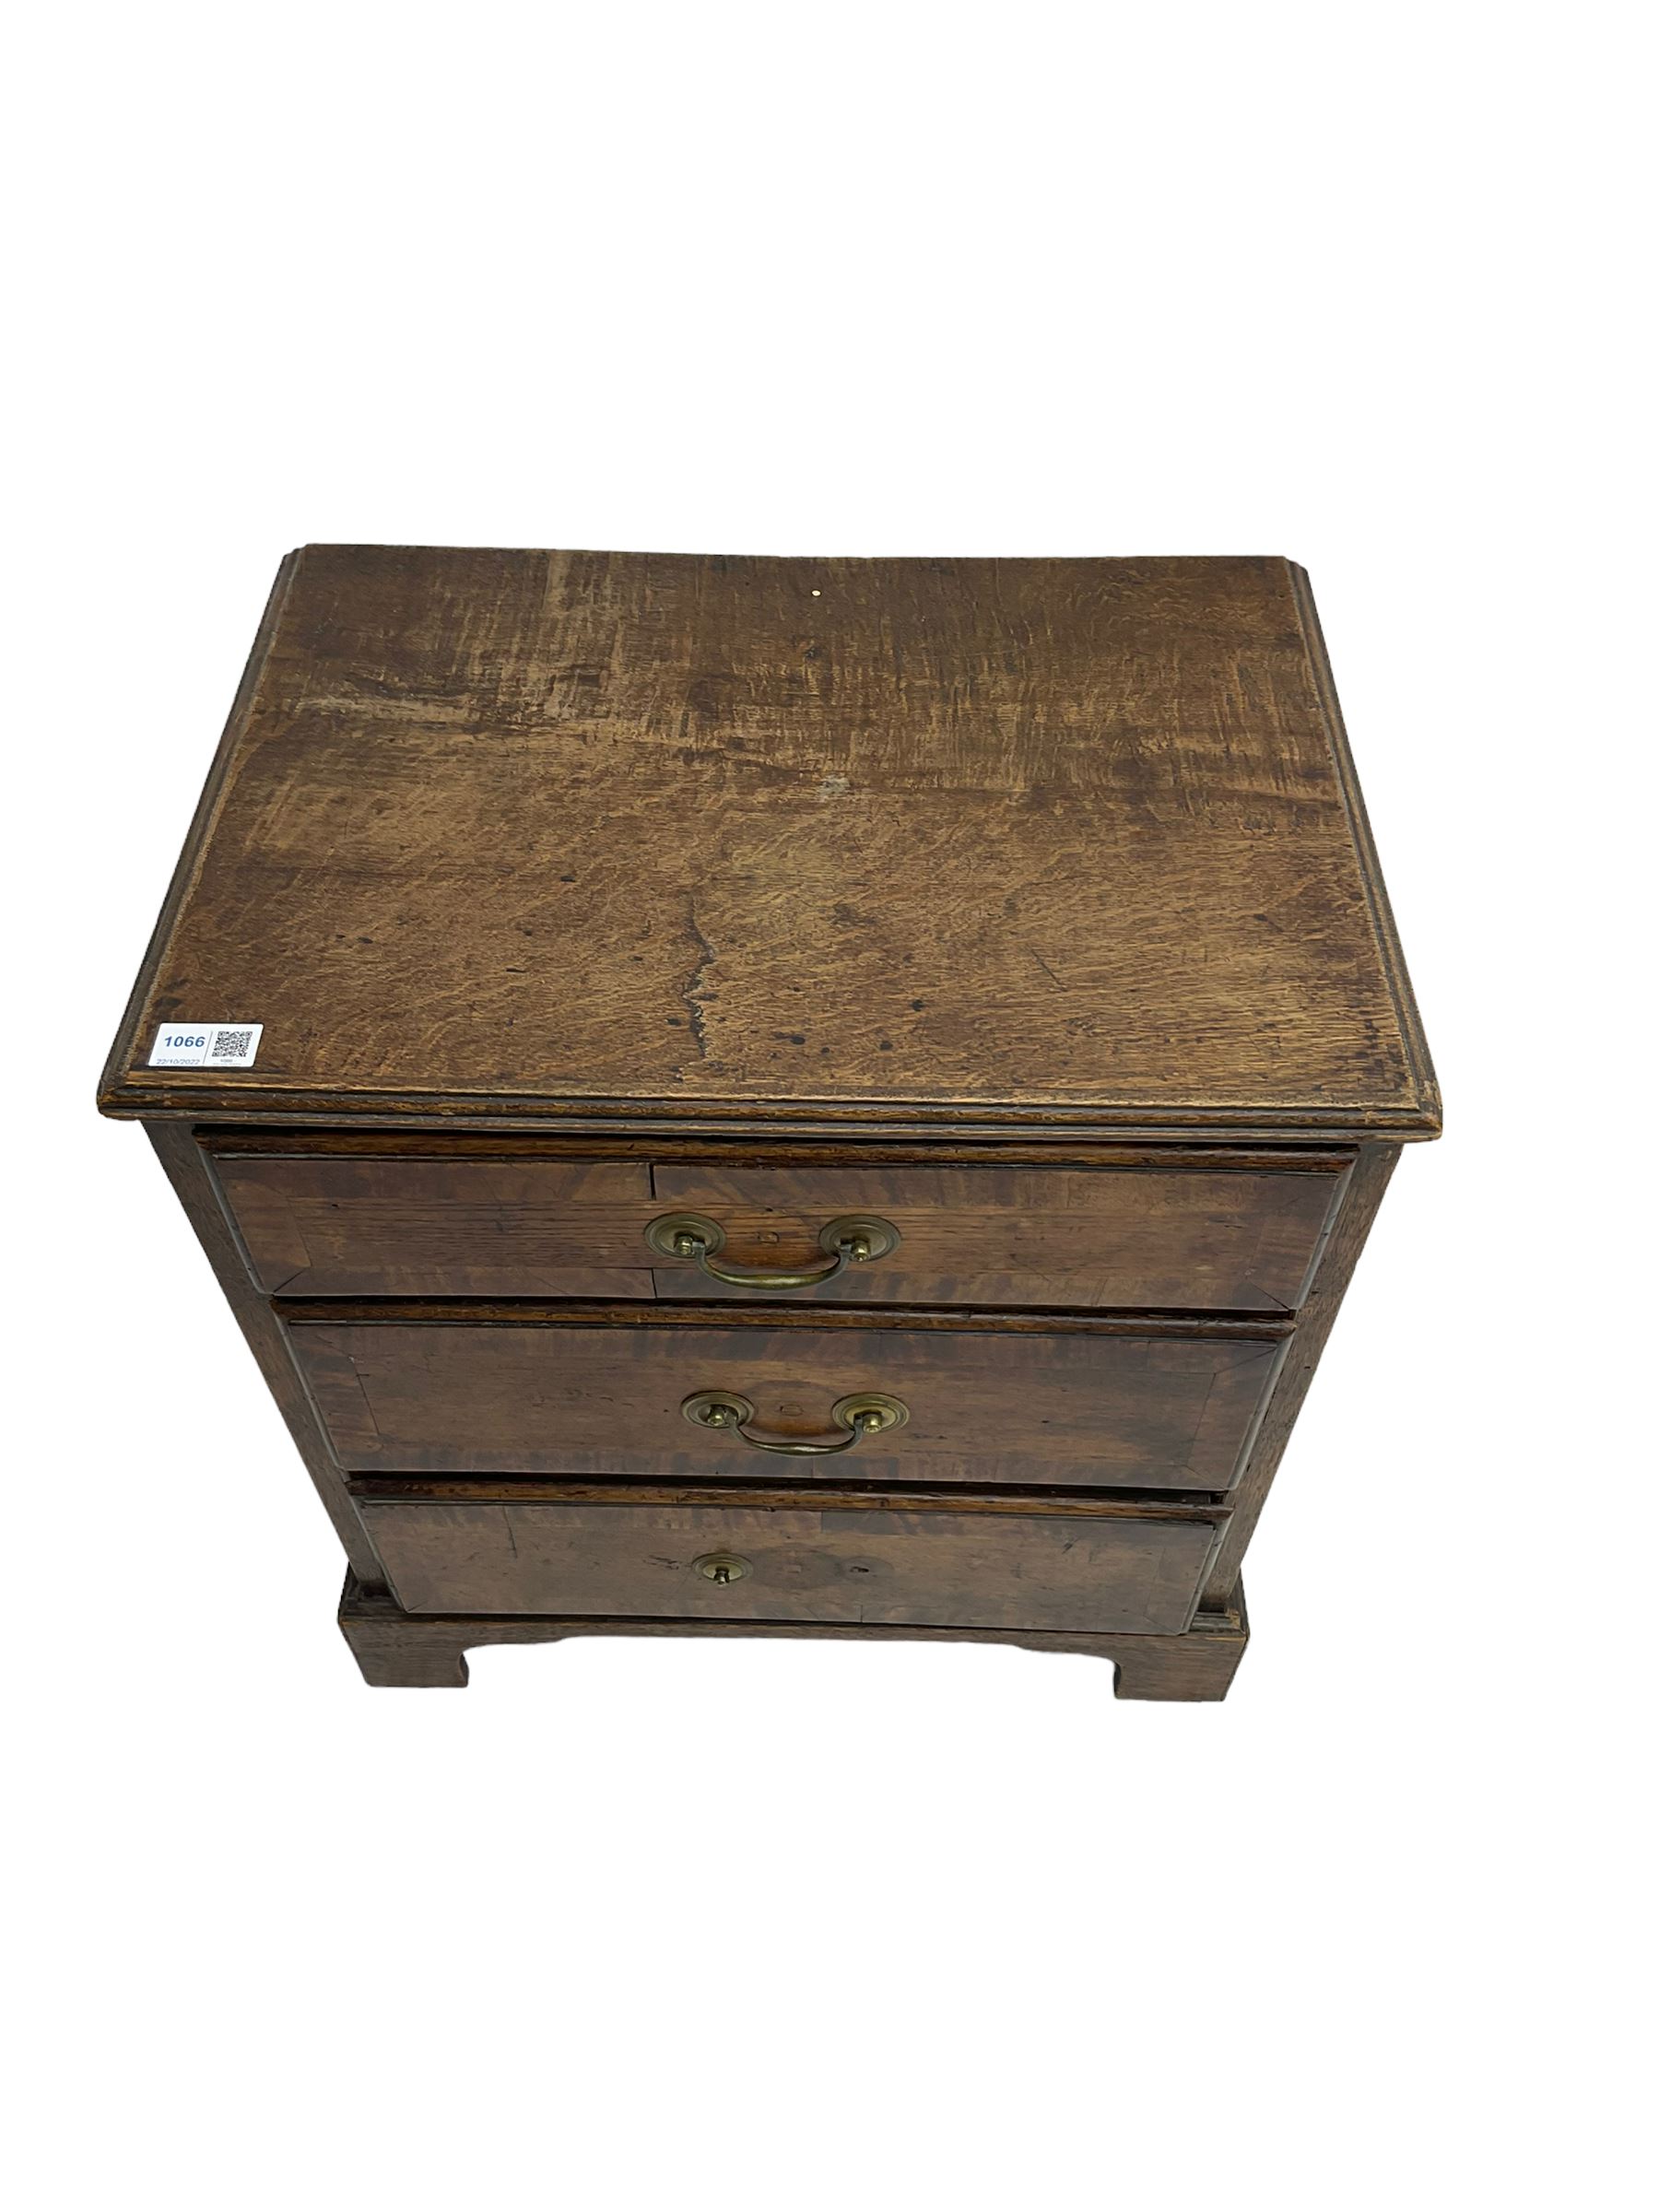 Small 19th century and later oak chest - Image 8 of 9